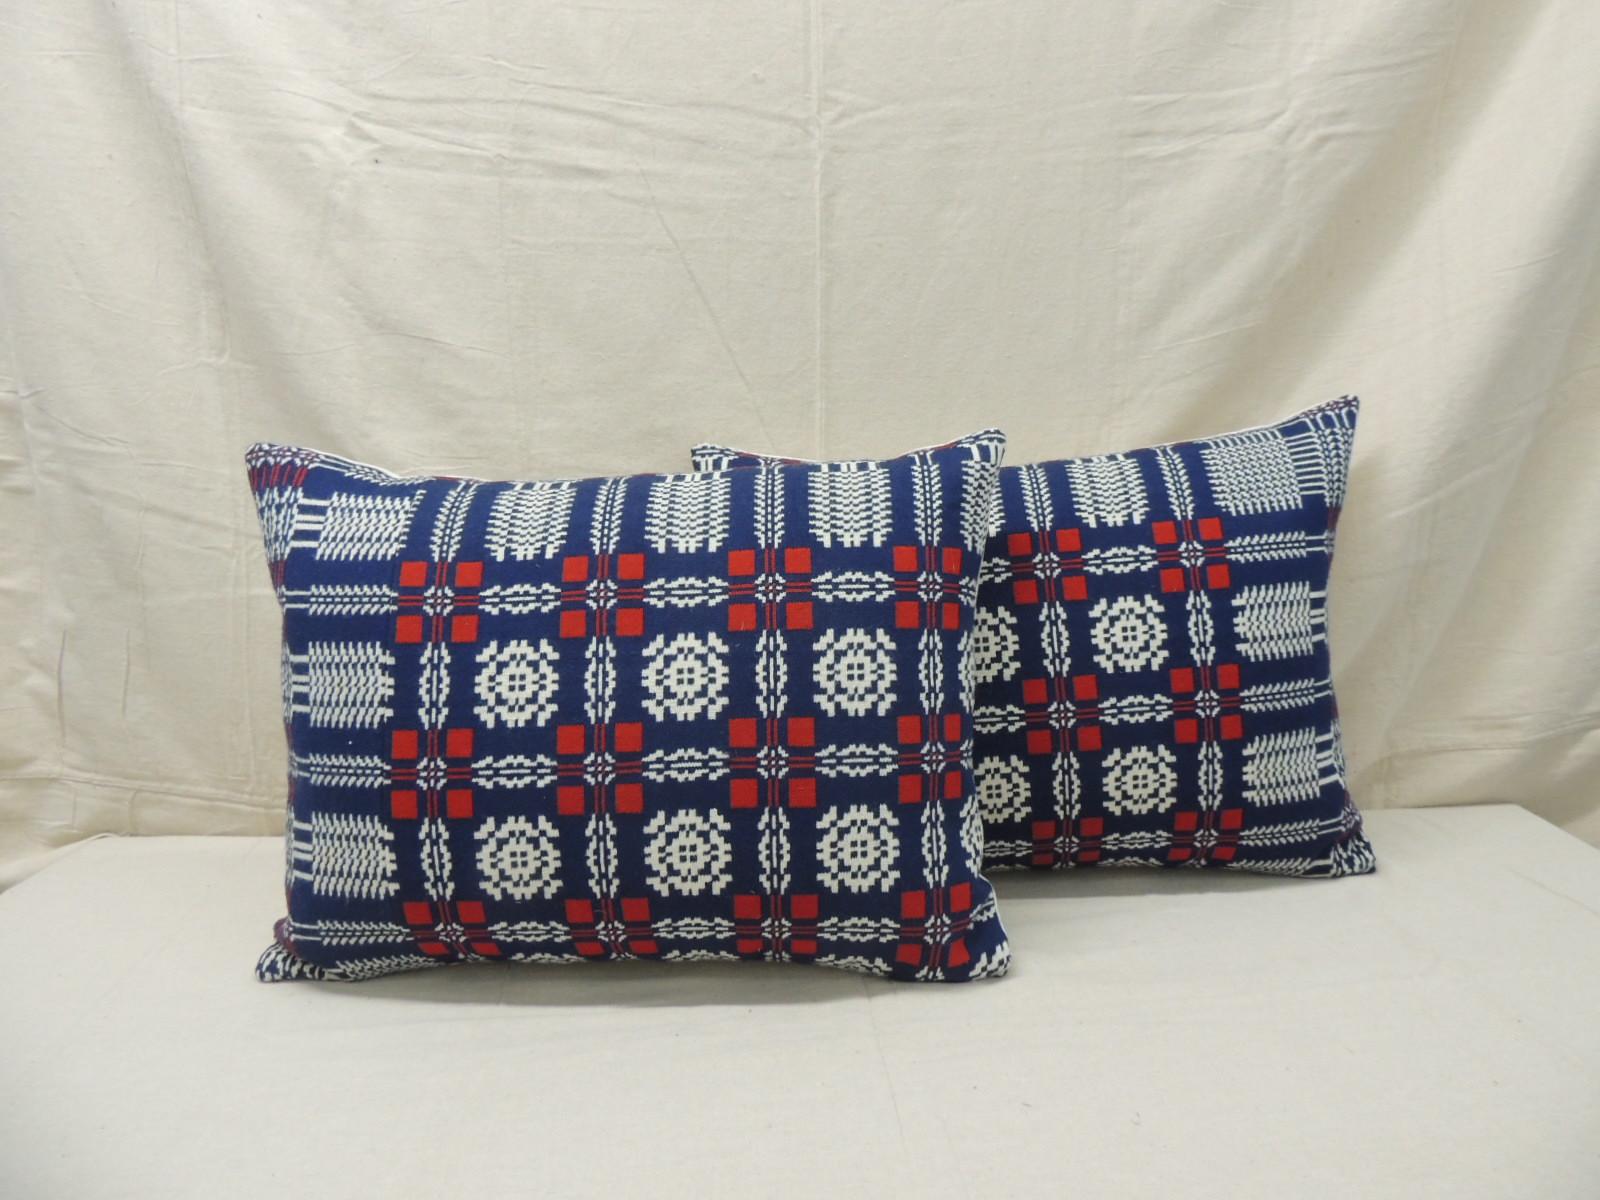 Set of (2) Americana red, white and blue large bolster decorative pillows.
Patchwork style seams and texture natural color linen backings.
Closure by stitch (no zipper closure) with custom-made feather/Down pillow inserts.
Size: 19